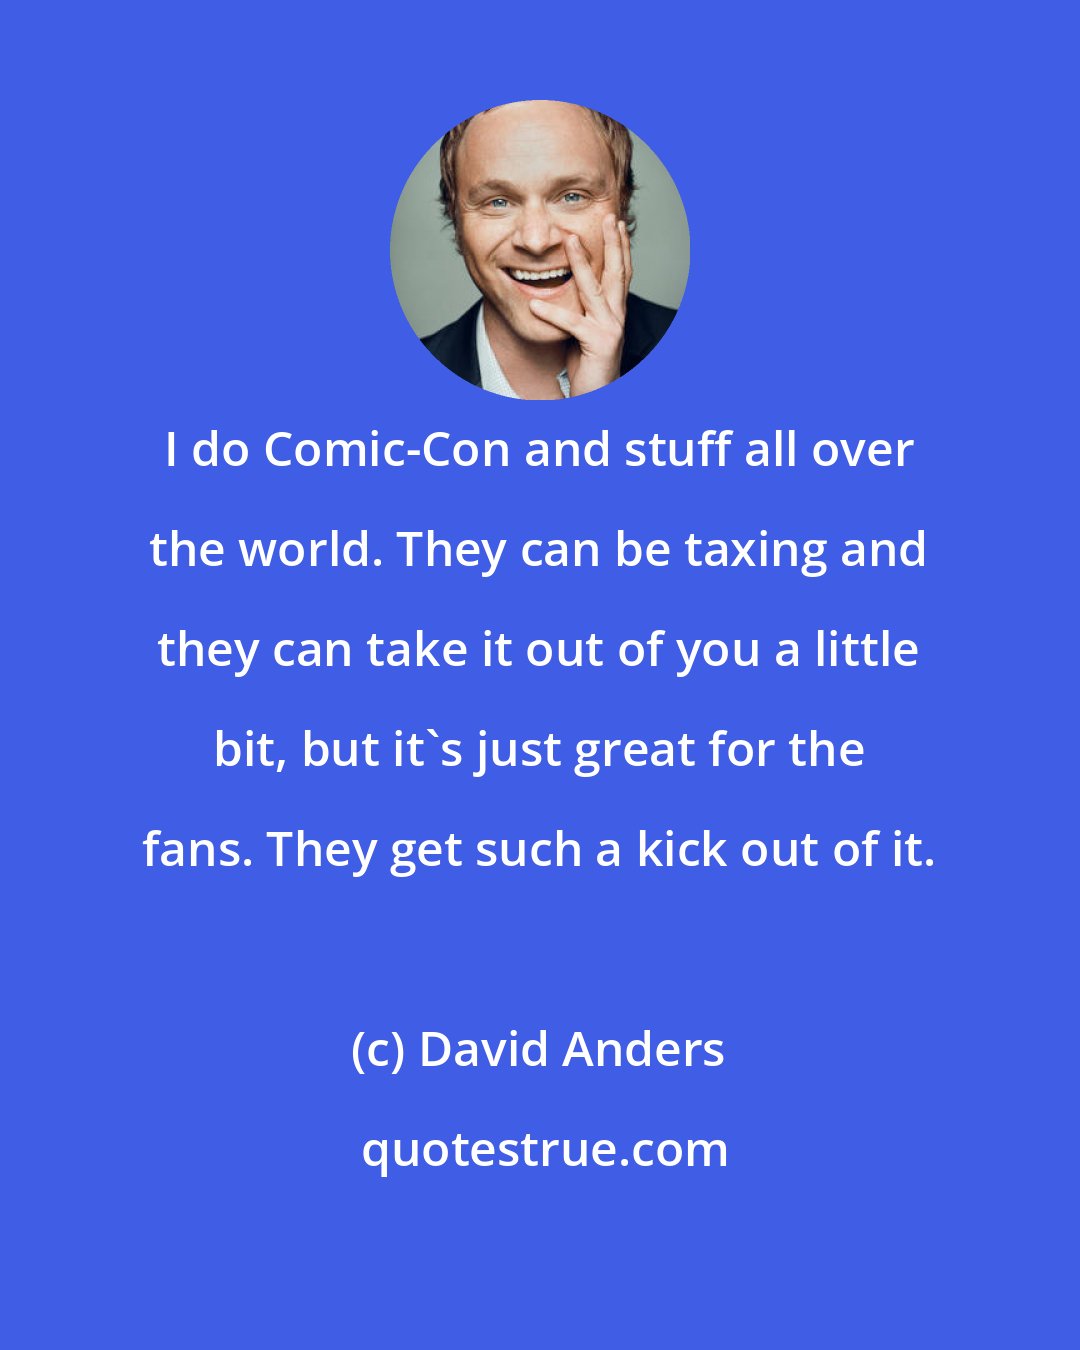 David Anders: I do Comic-Con and stuff all over the world. They can be taxing and they can take it out of you a little bit, but it's just great for the fans. They get such a kick out of it.